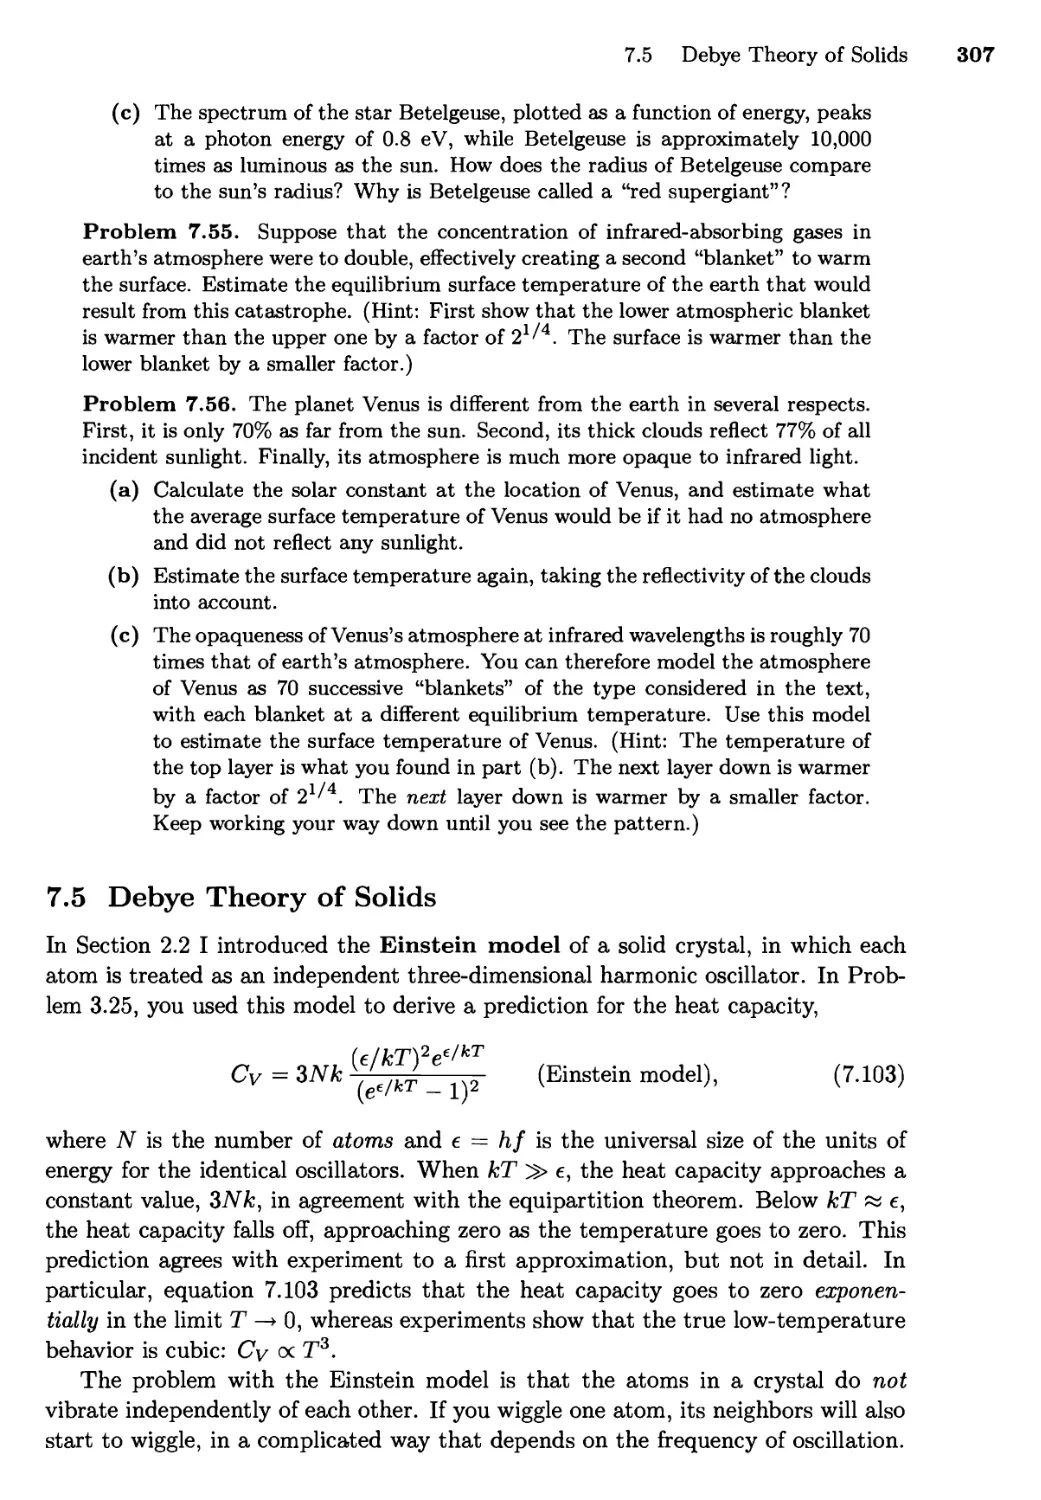 7.5 Debye Theory of Solids